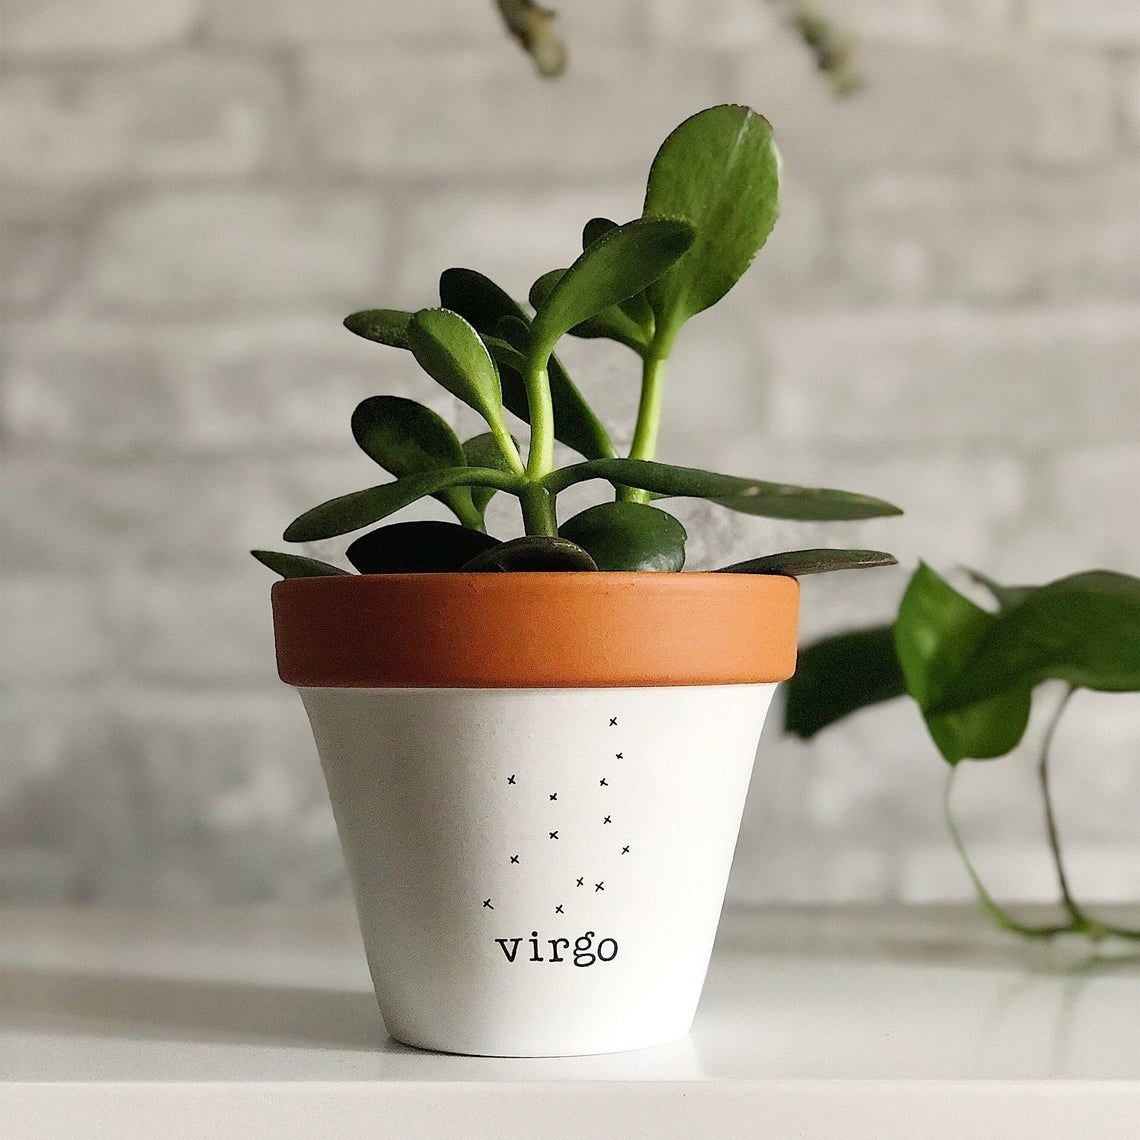 The plant pot with a plant inside